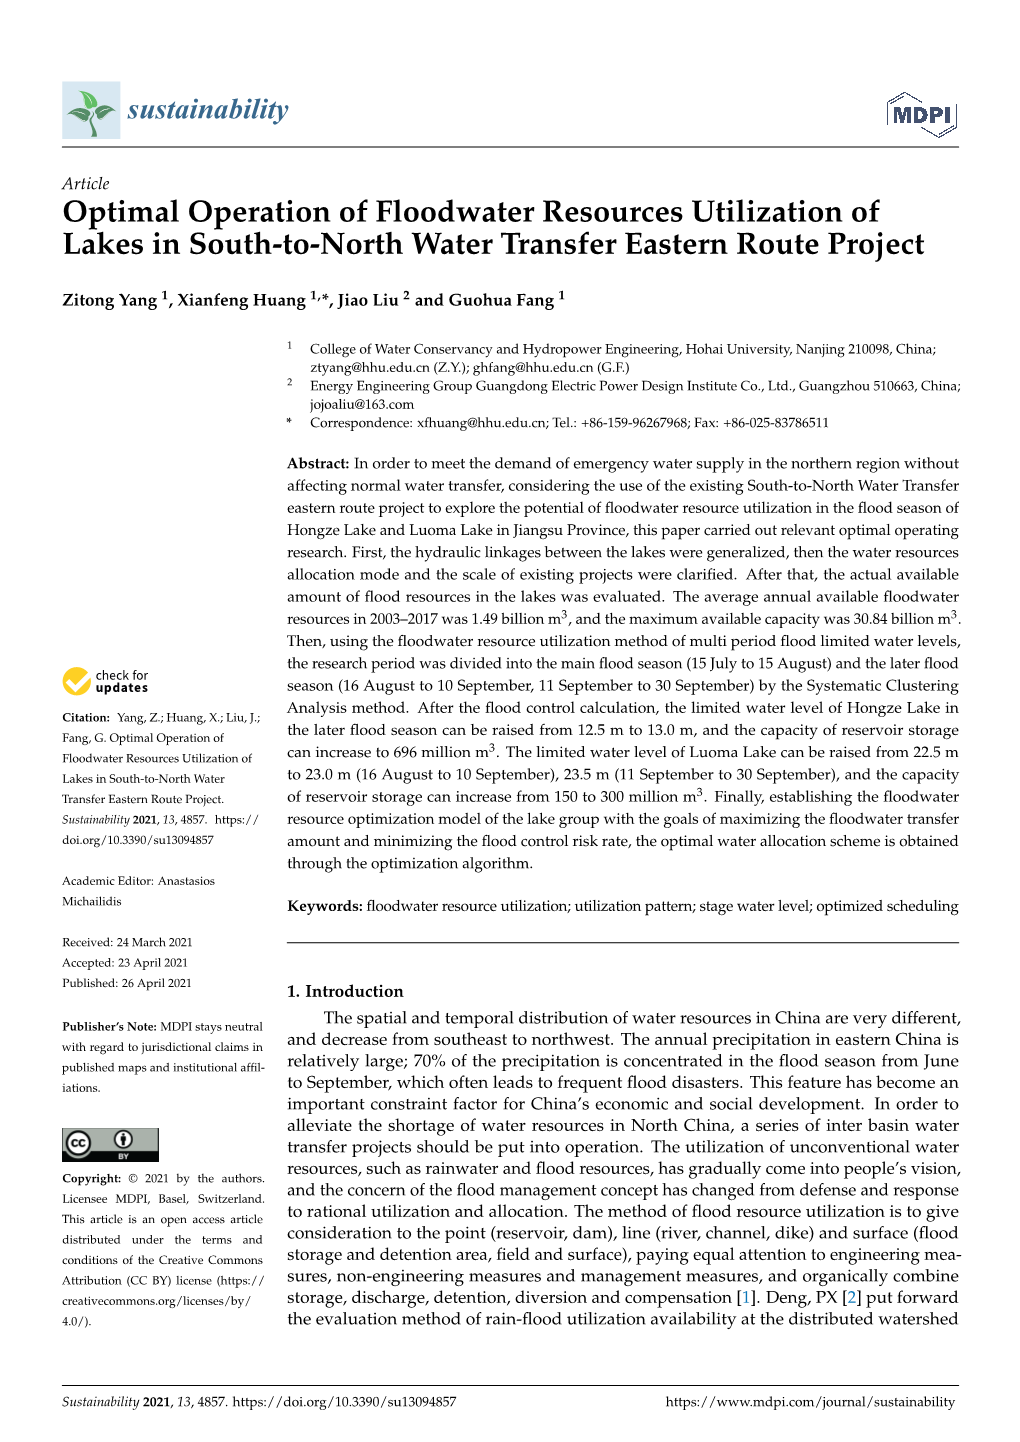 Optimal Operation of Floodwater Resources Utilization of Lakes in South-To-North Water Transfer Eastern Route Project